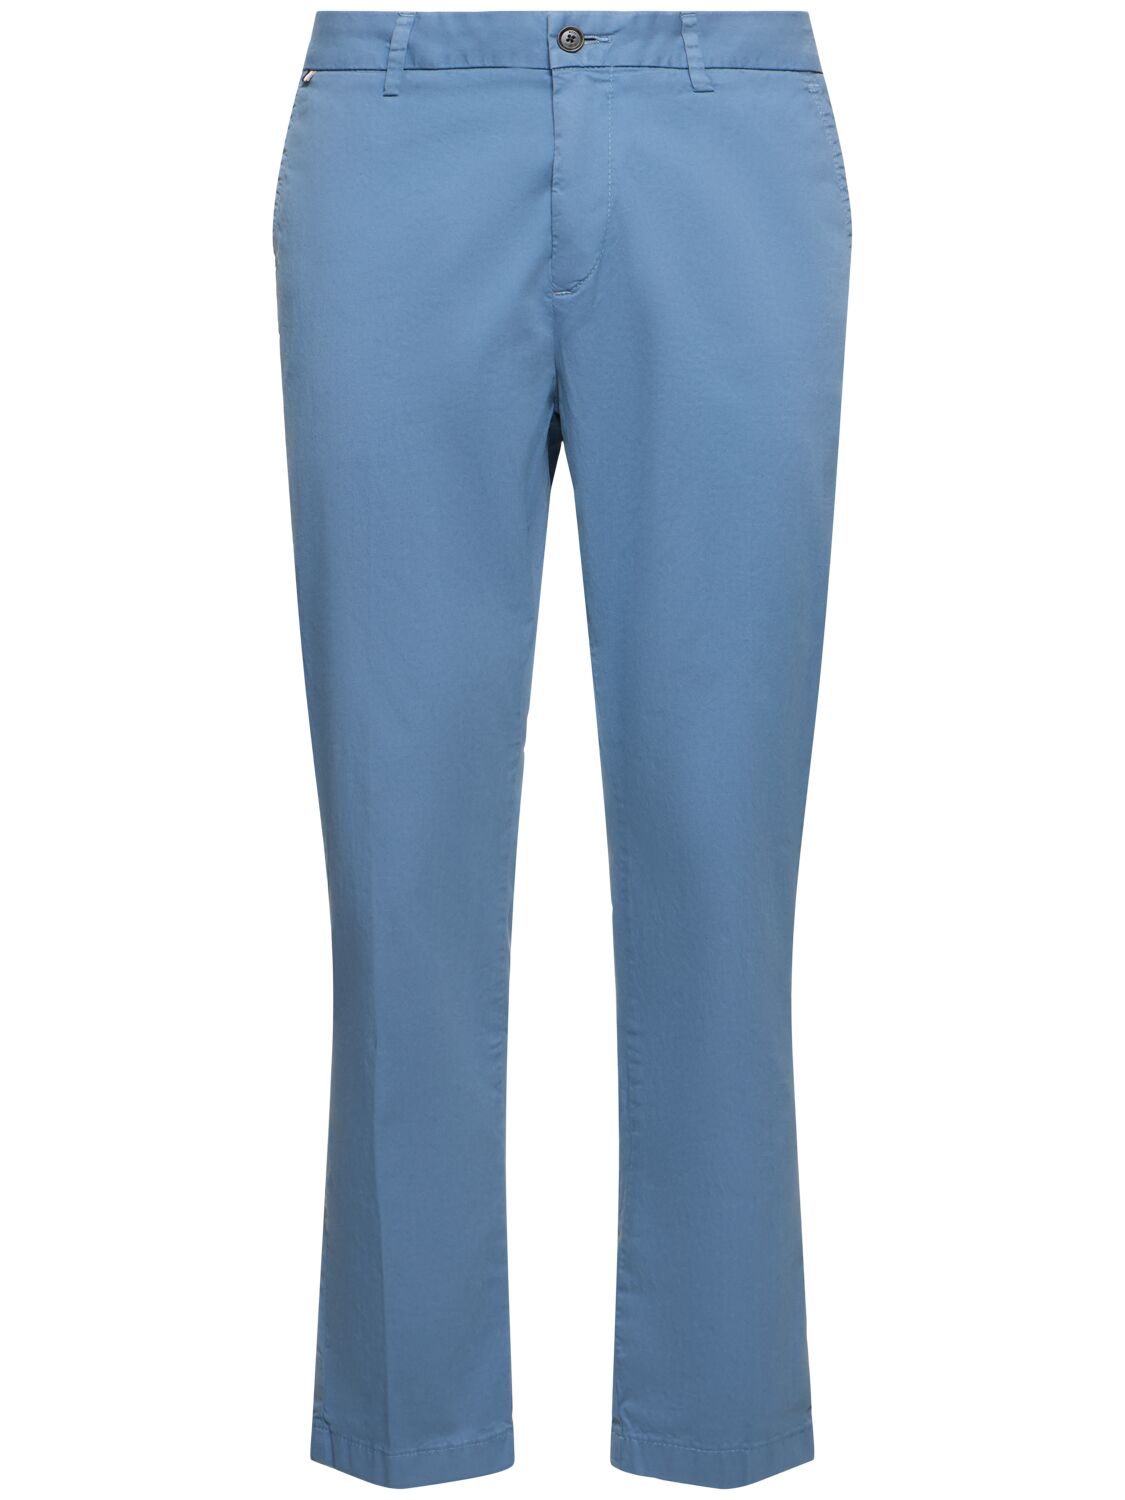 Hugo Boss Kaiton Stretch Cotton Trousers In Light Blue